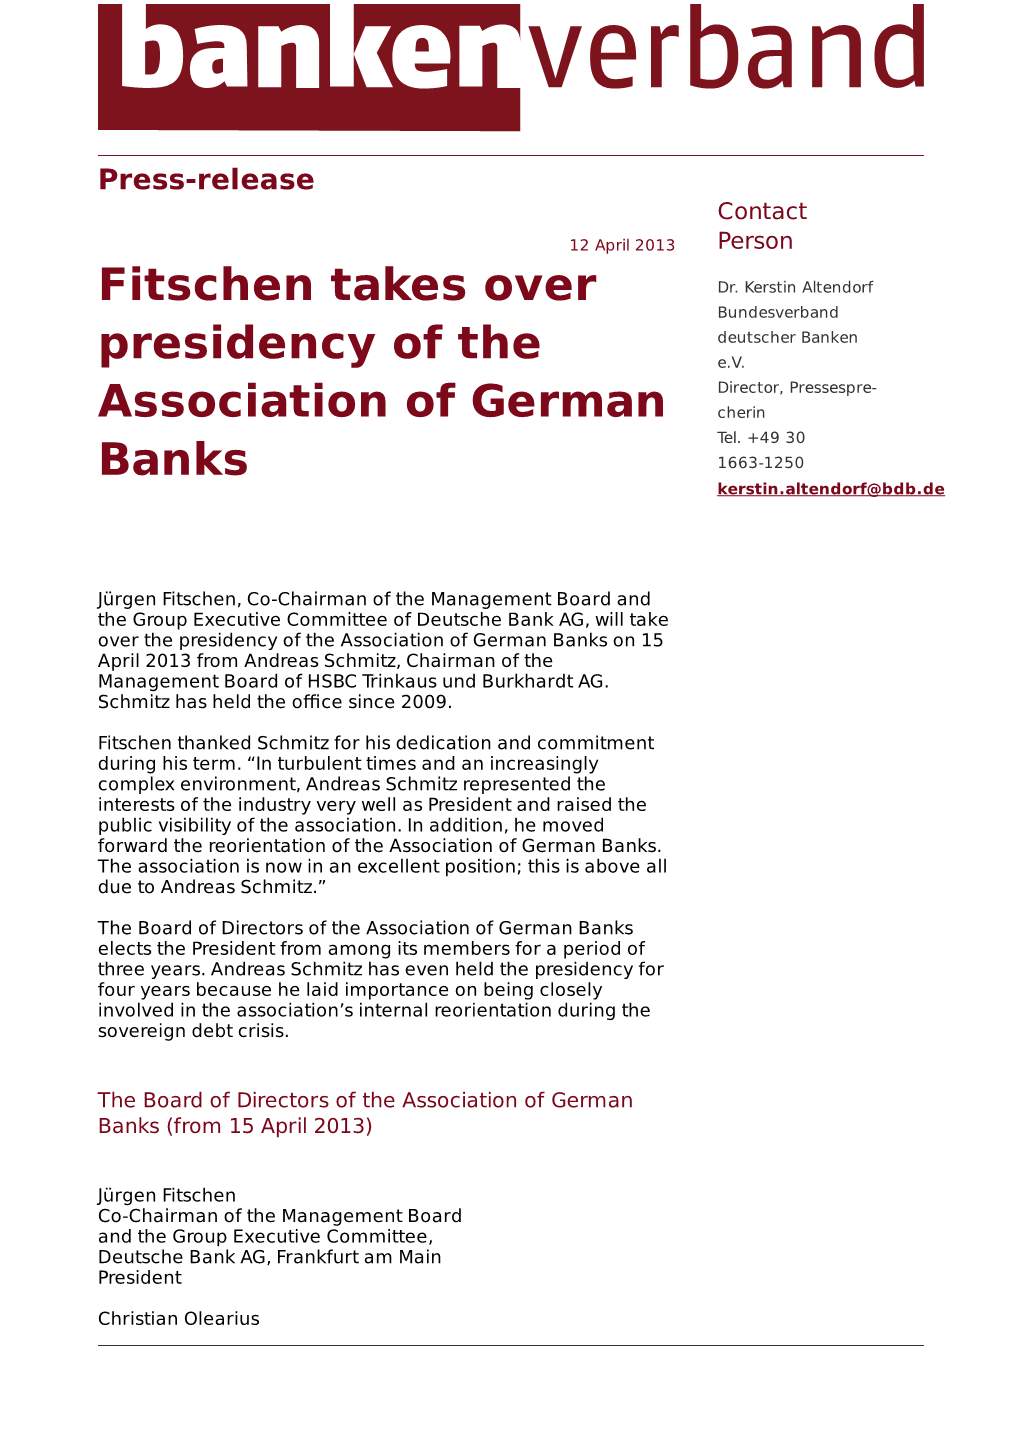 Fitschen Takes Over Presidency of the Association of German Banks